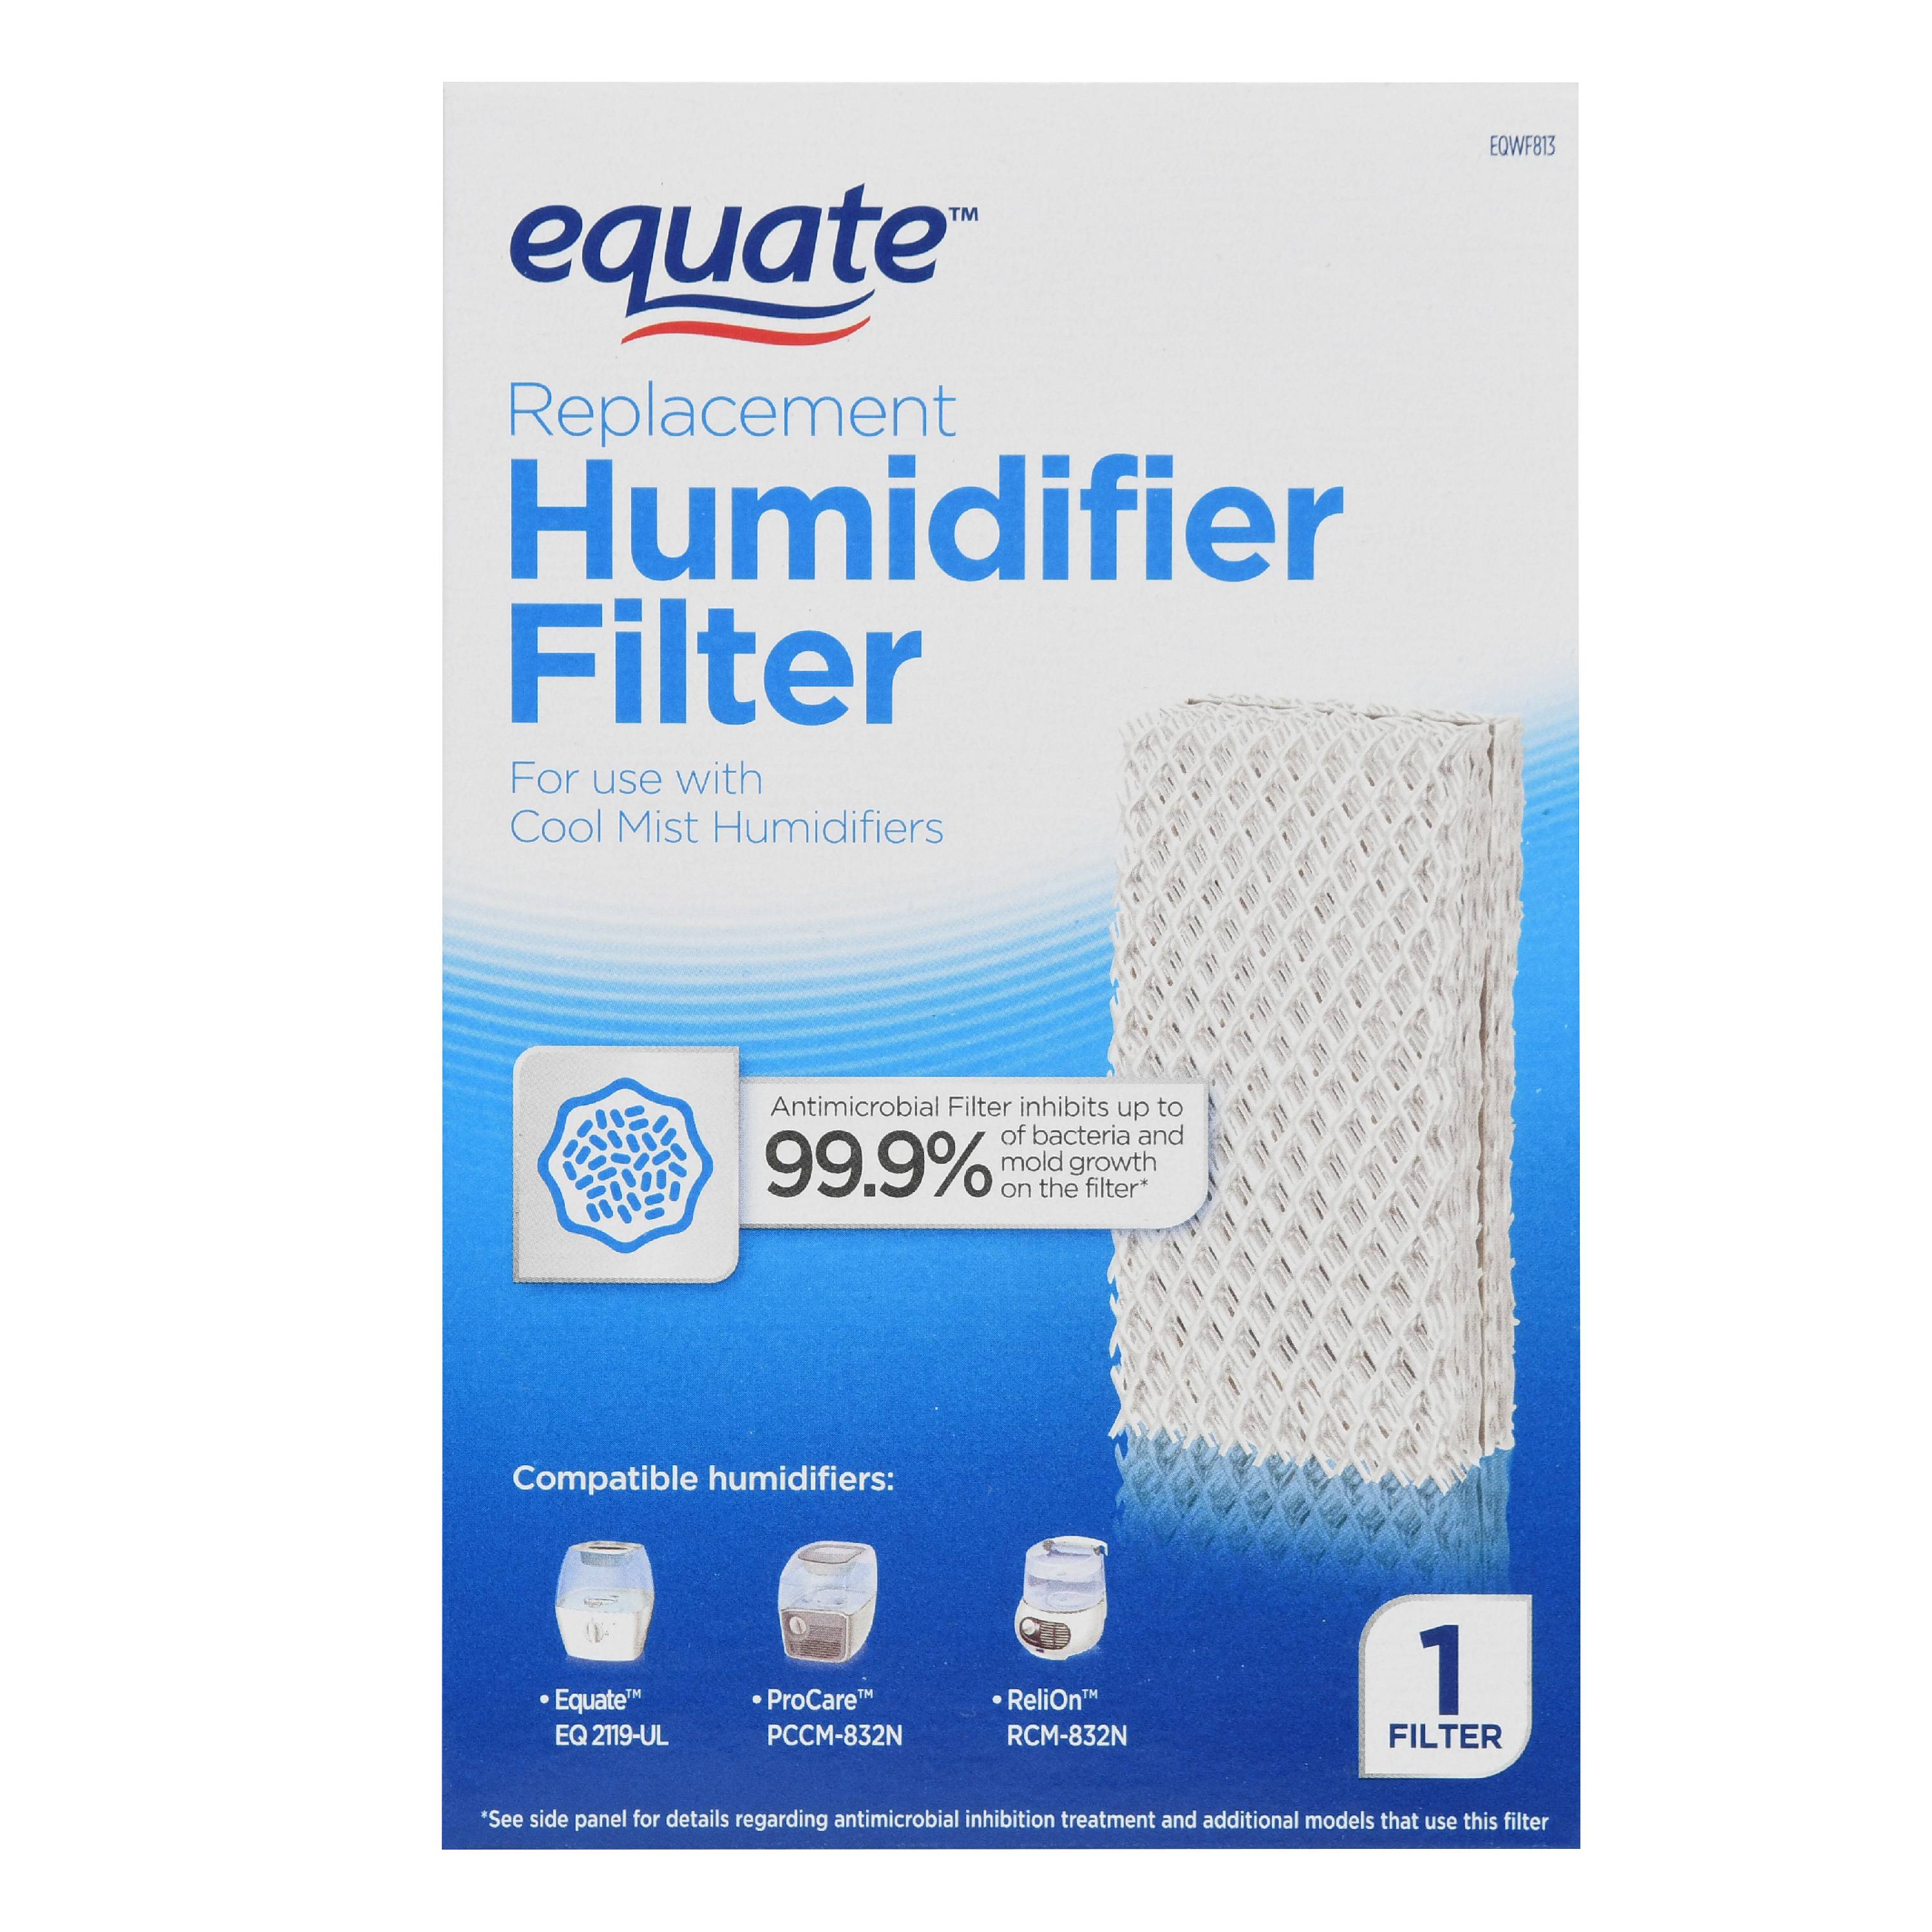 Equate Replacement Humidifier Filter for Use with Cool Mist Humidifiers for sale online